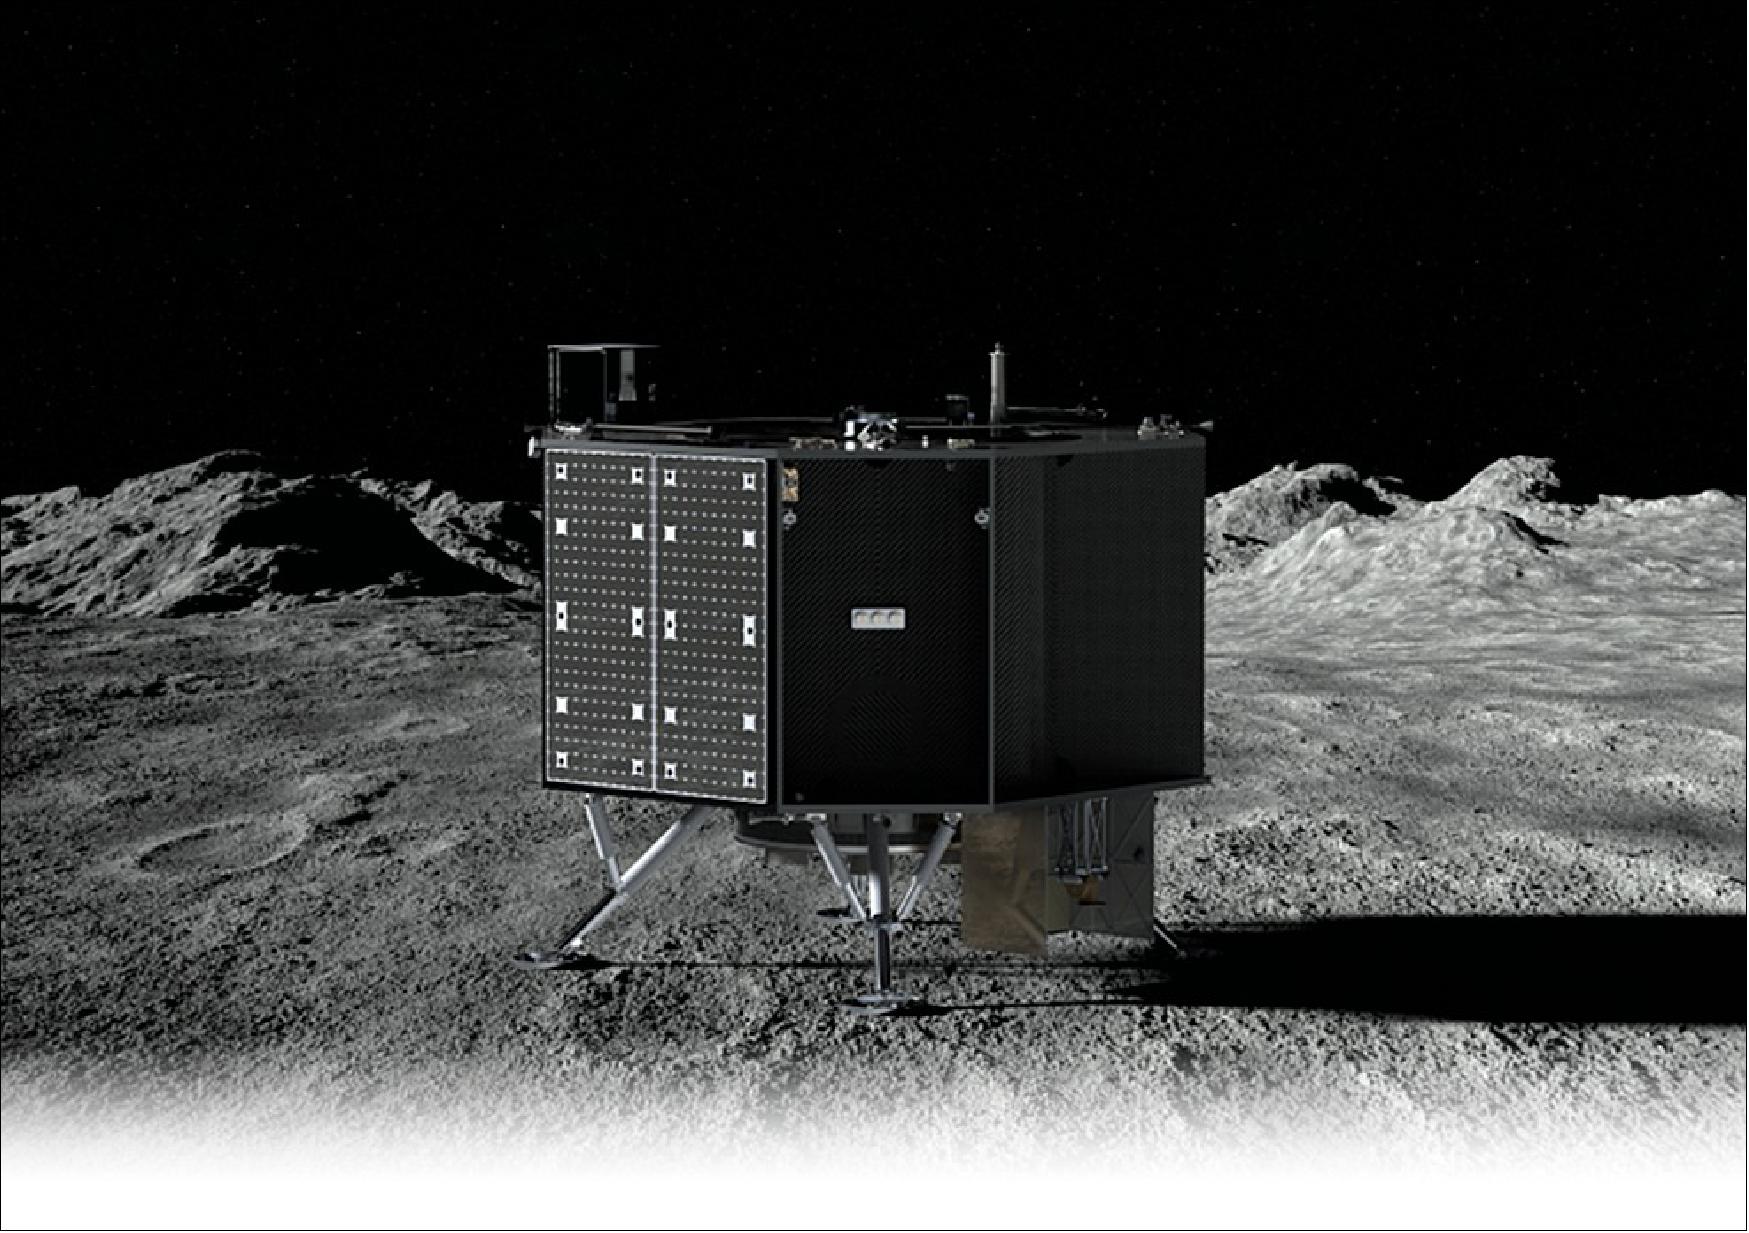 Figure 4: An illustration of Draper’s SERIES-2 lunar lander, which will deliver science and technology payloads to the Moon for NASA in 2025 (image credit: Draper)